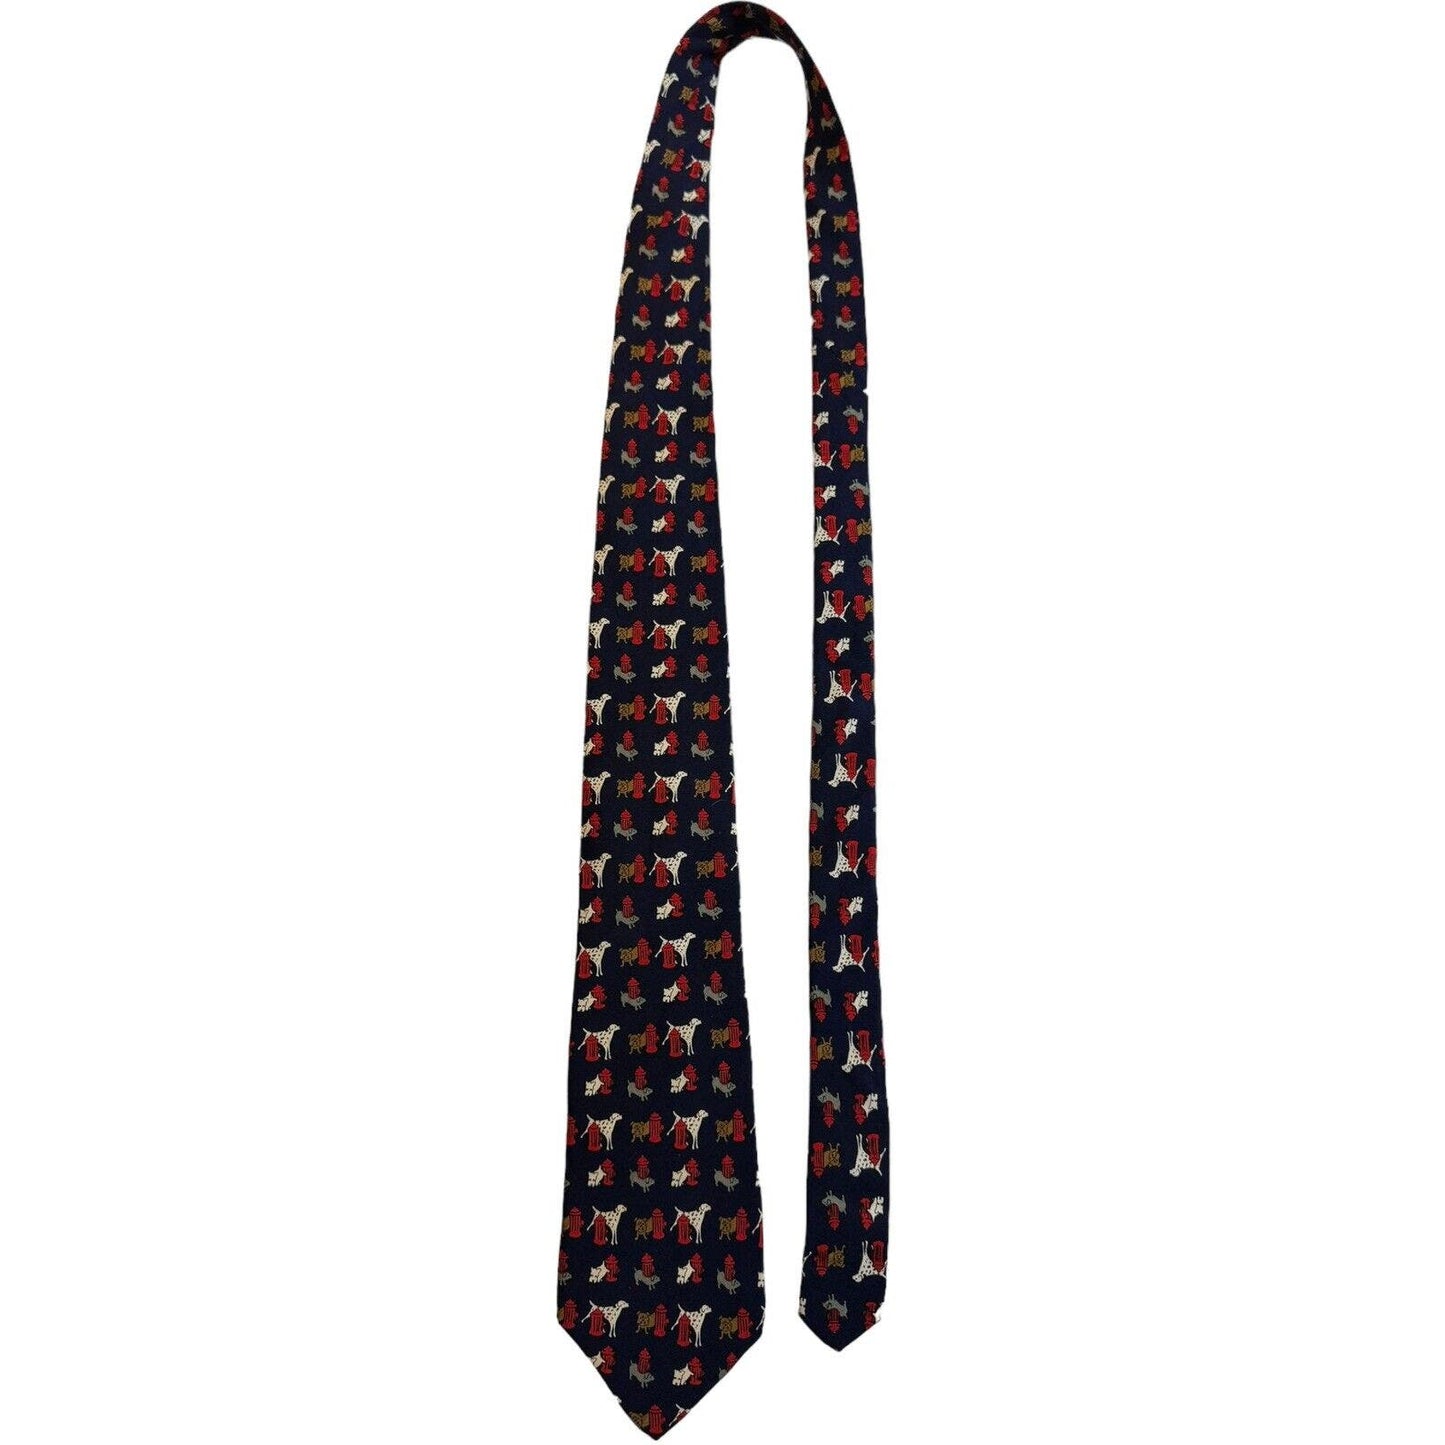 Alynn Neckwear The Pause That Refreshes Dogs Fire Hydrant Novelty Necktie